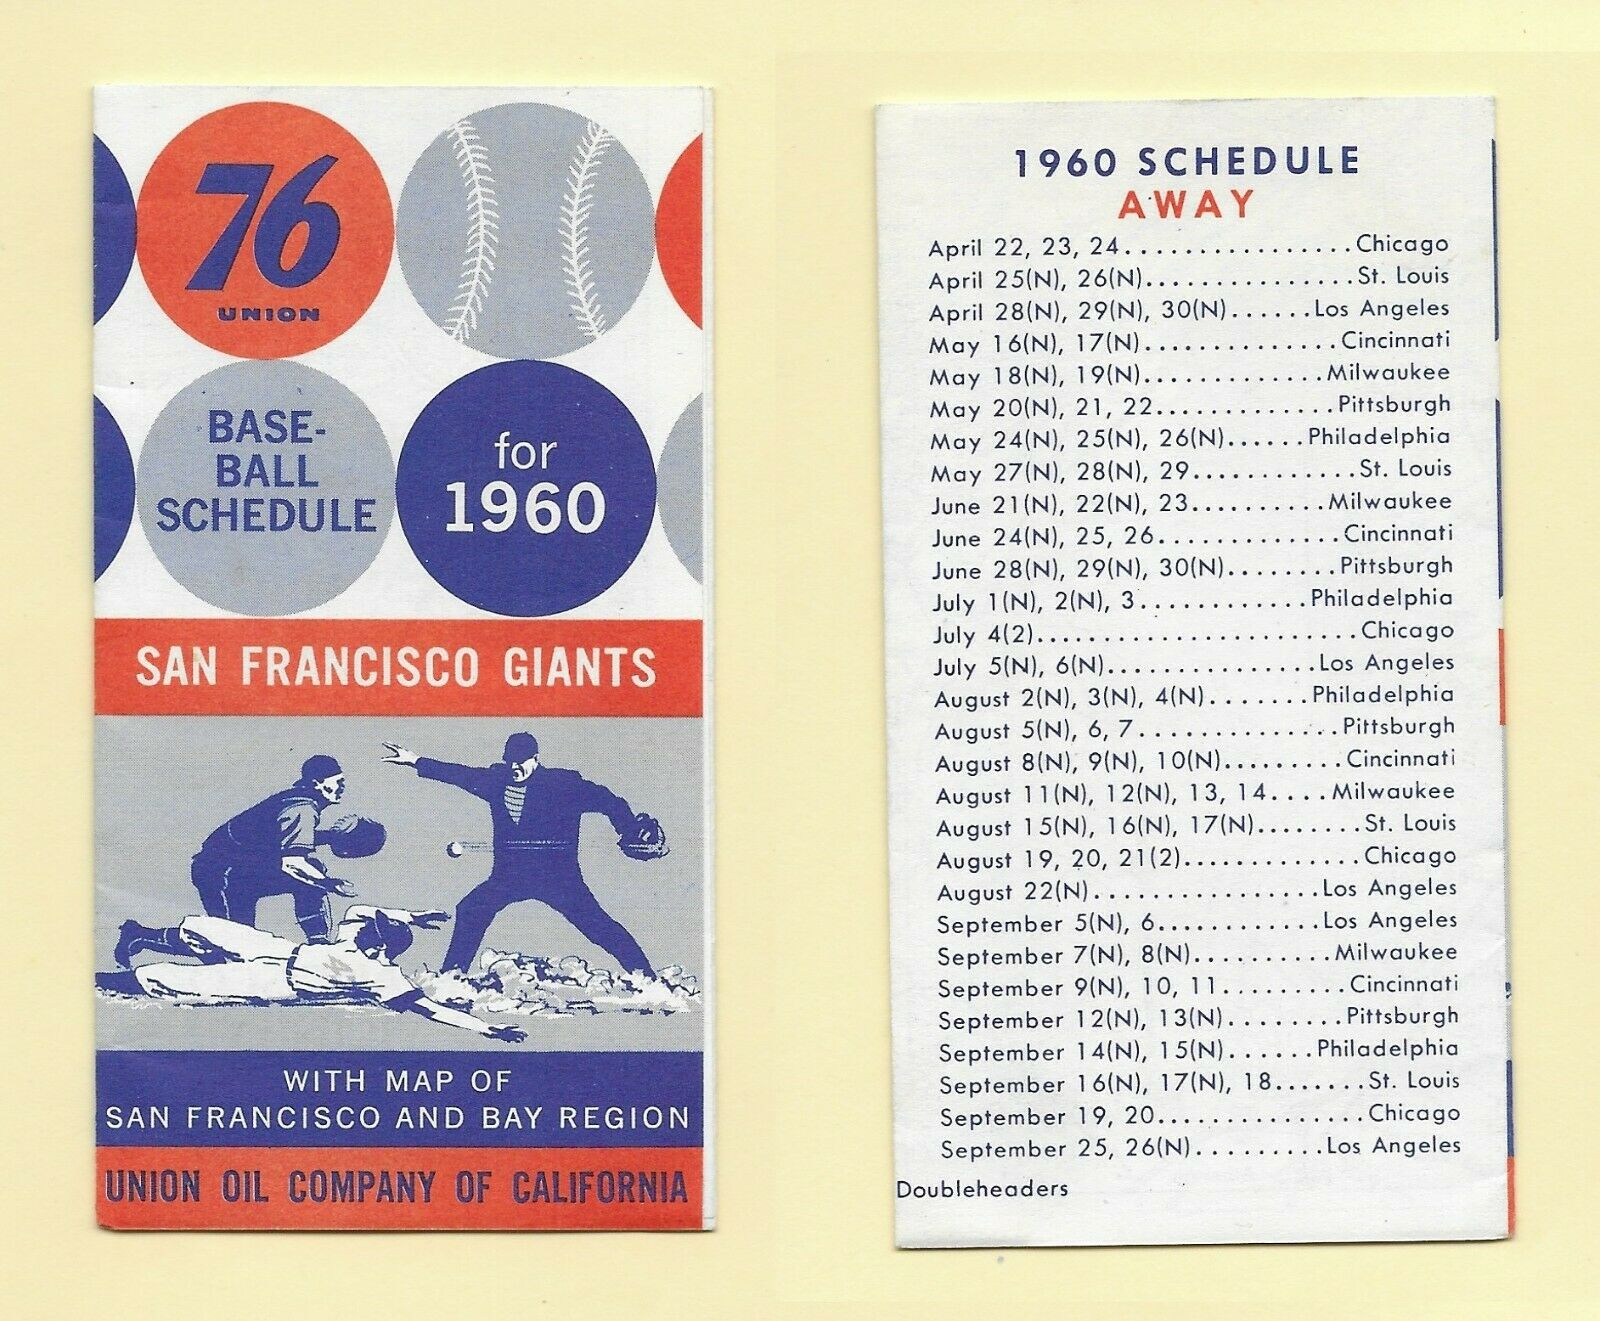 1960 San Francisco Giants Schedule - 76 Union - First Season At Candlestick